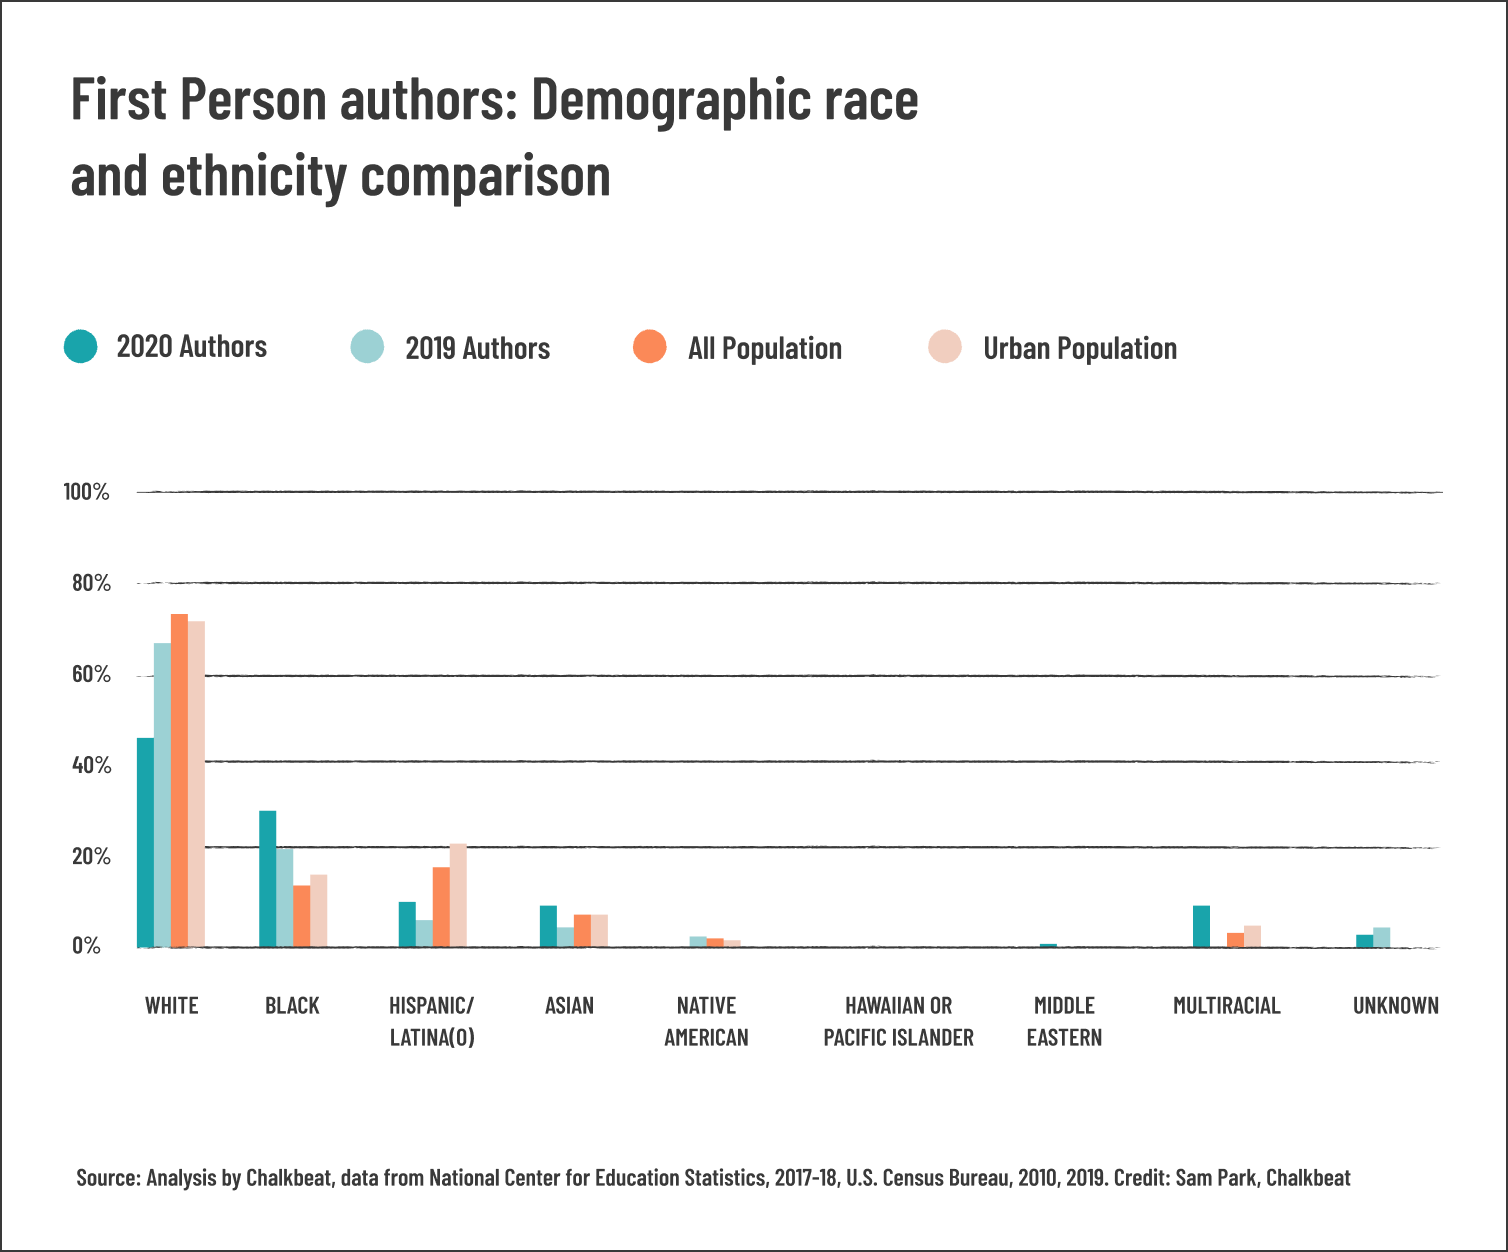 First Person authors: Demographic race and ethnicity comparison chart